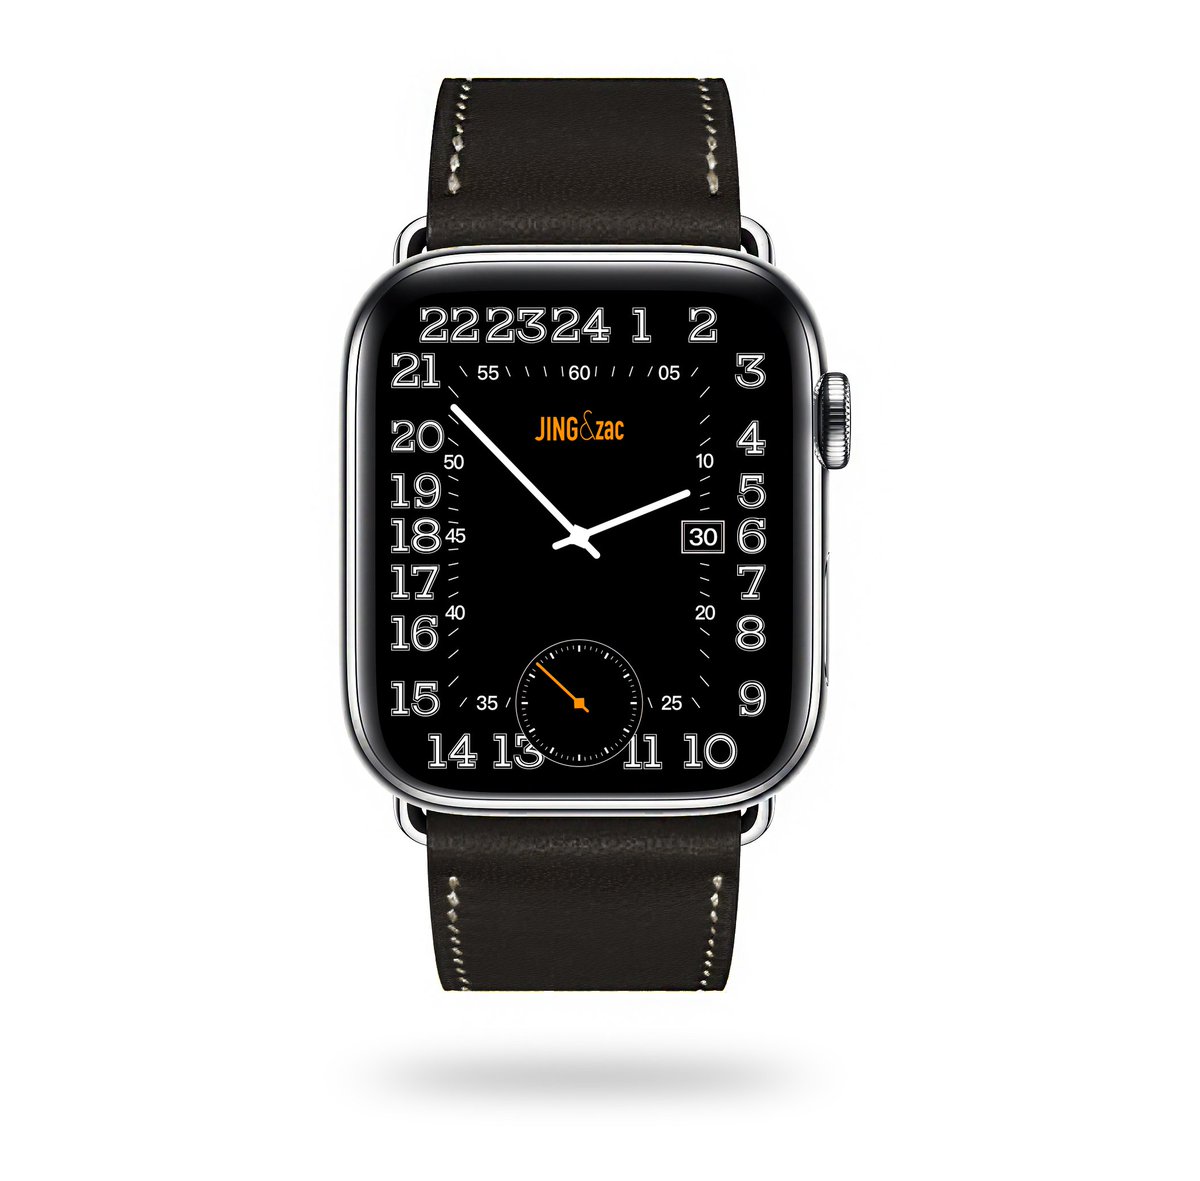 JingWatch Apple Watch Face on X: "New update V 2.1.95: 1. Add complication  to open the app; 2. Fix some errors; 3. New faces added; 4. Many users  shared or sell there